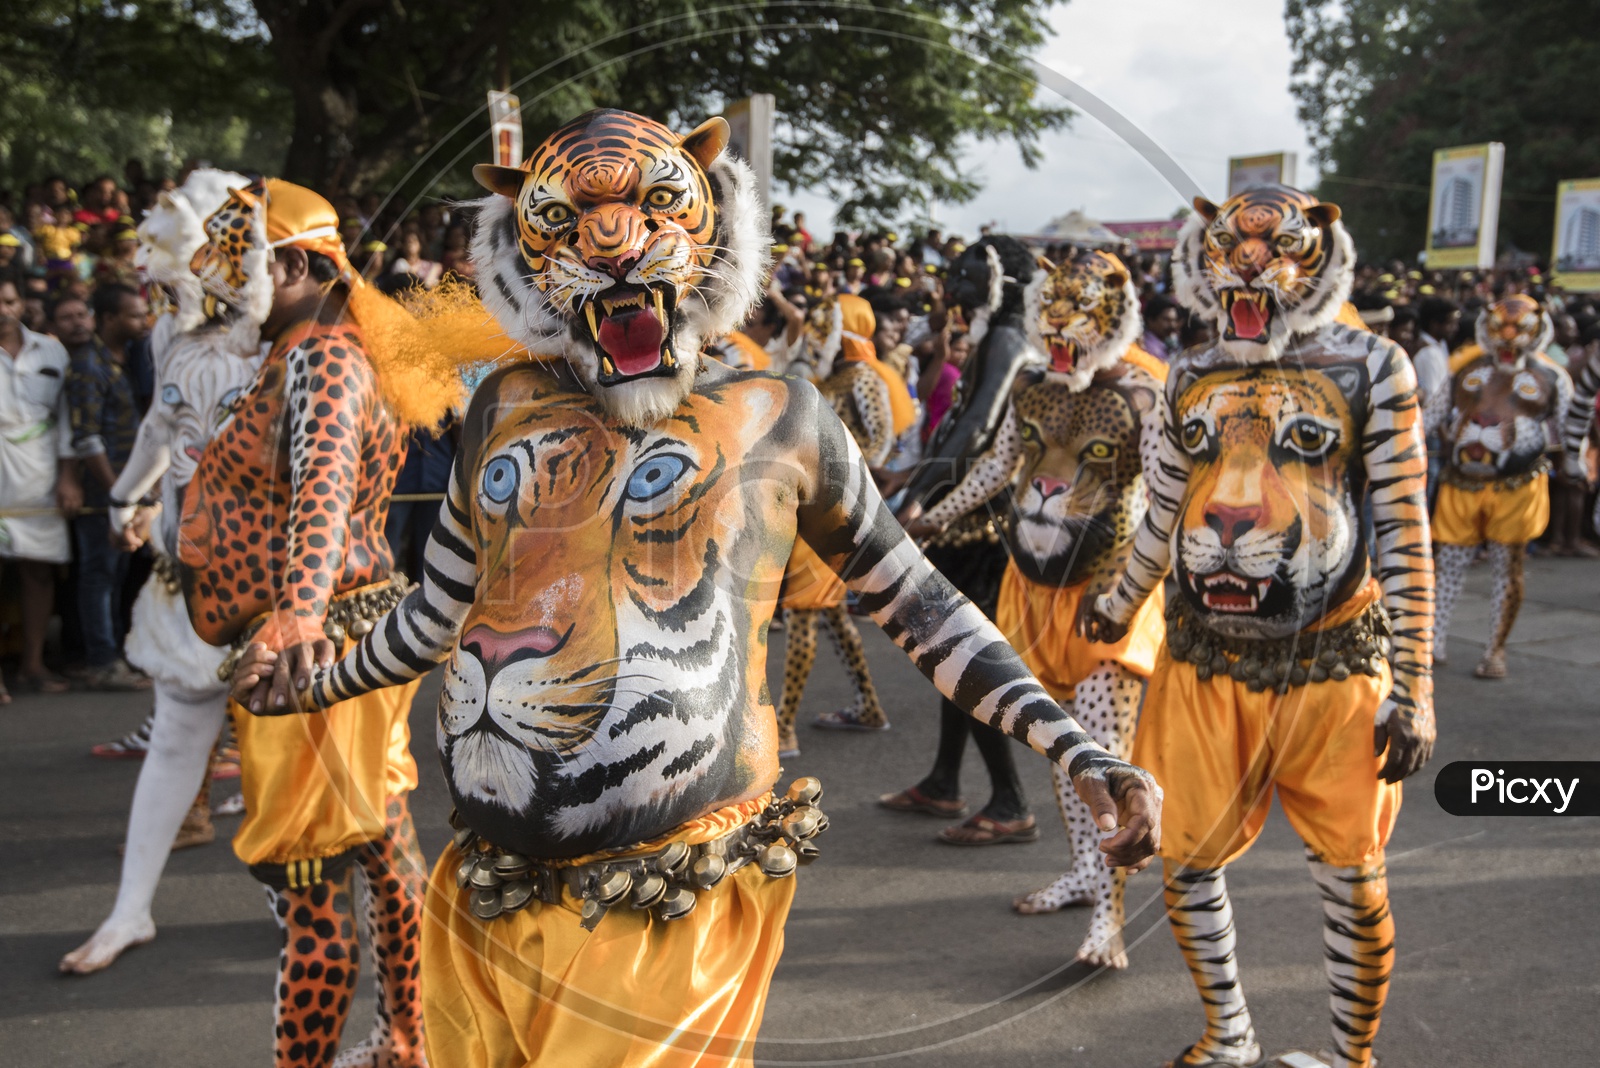 Pulikali (Play of the Tigers), A 200 year old folk art parade performed on Onam.